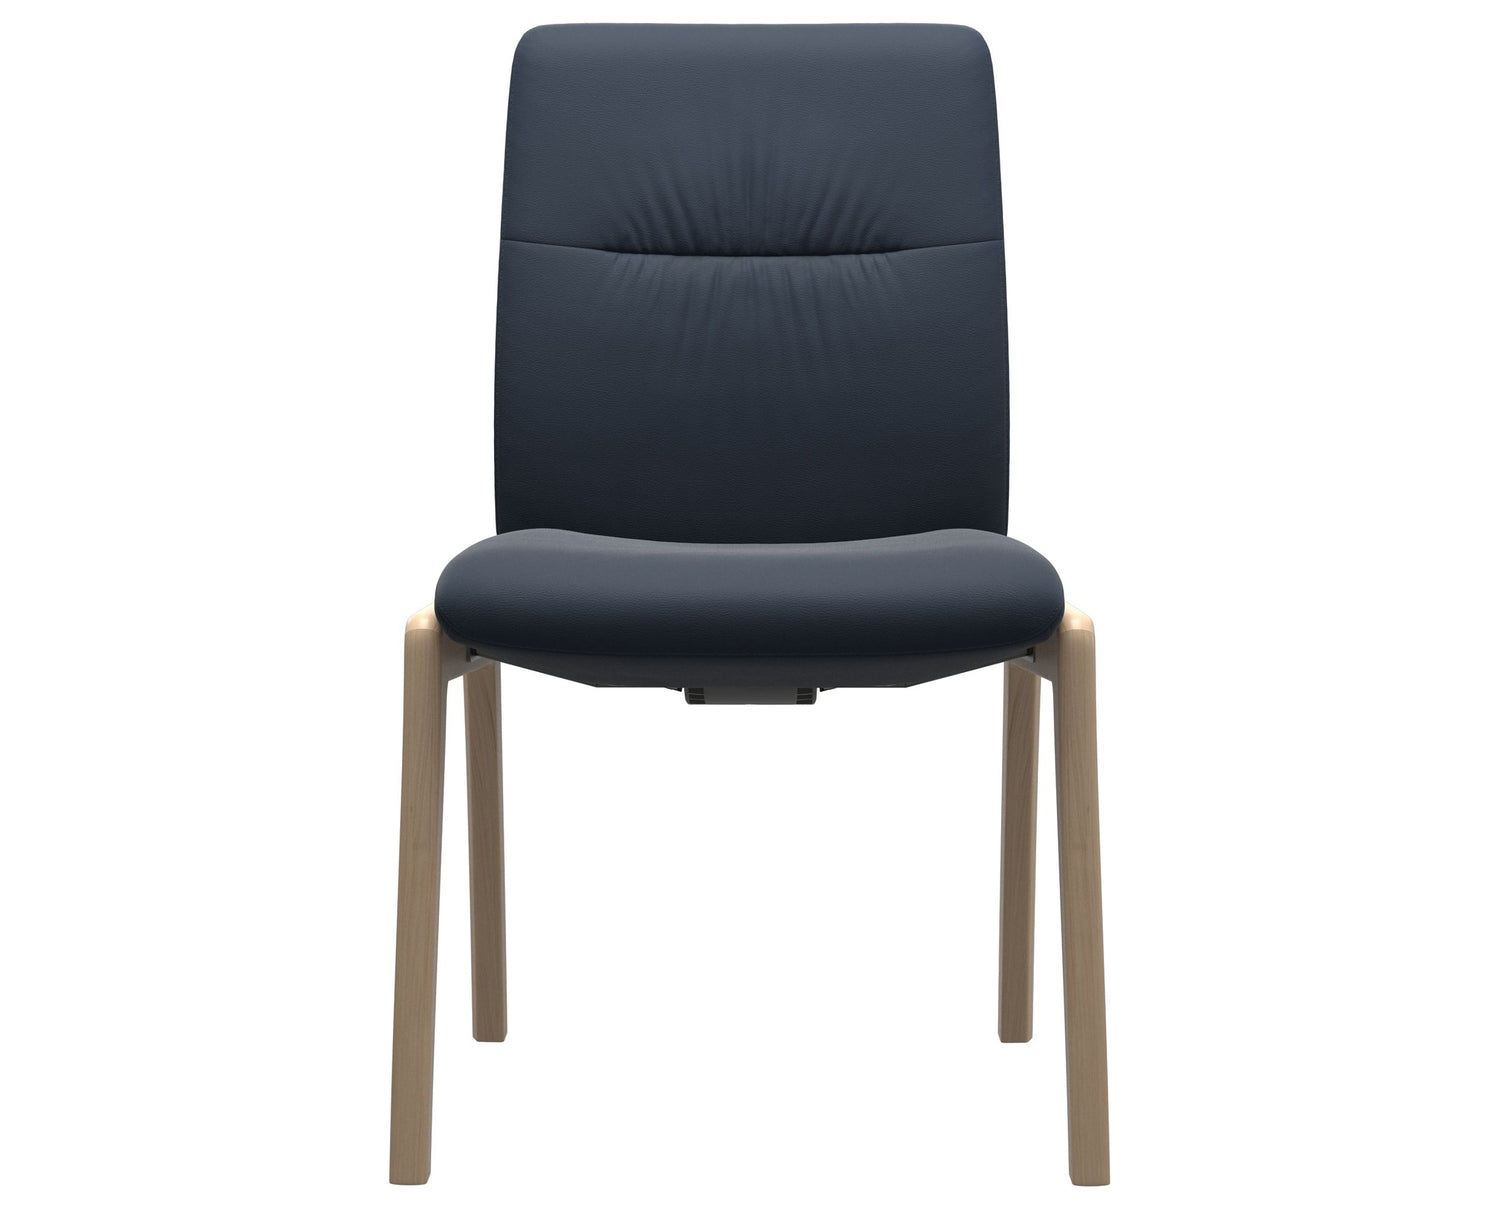 Paloma Leather Oxford Blue & Natural Base | Stressless Mint Low Back D100 Dining Chair | Valley Ridge Furniture